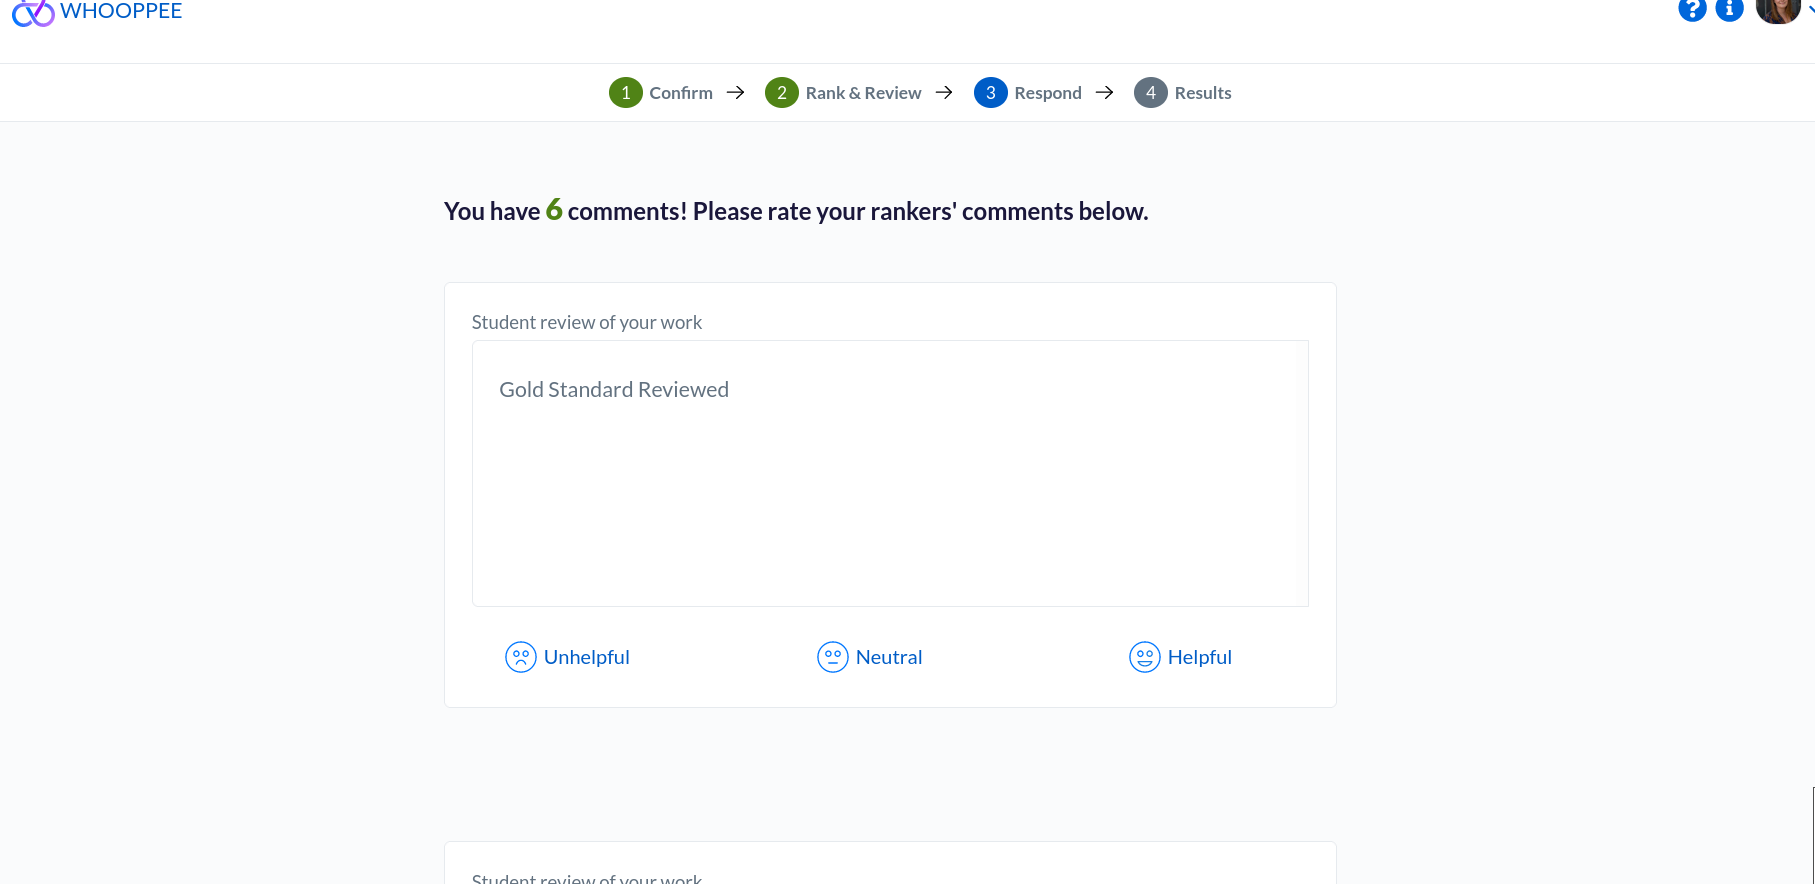 The Respond phase landing page. Includes a line of text indicating how many comments need to be reviewed.